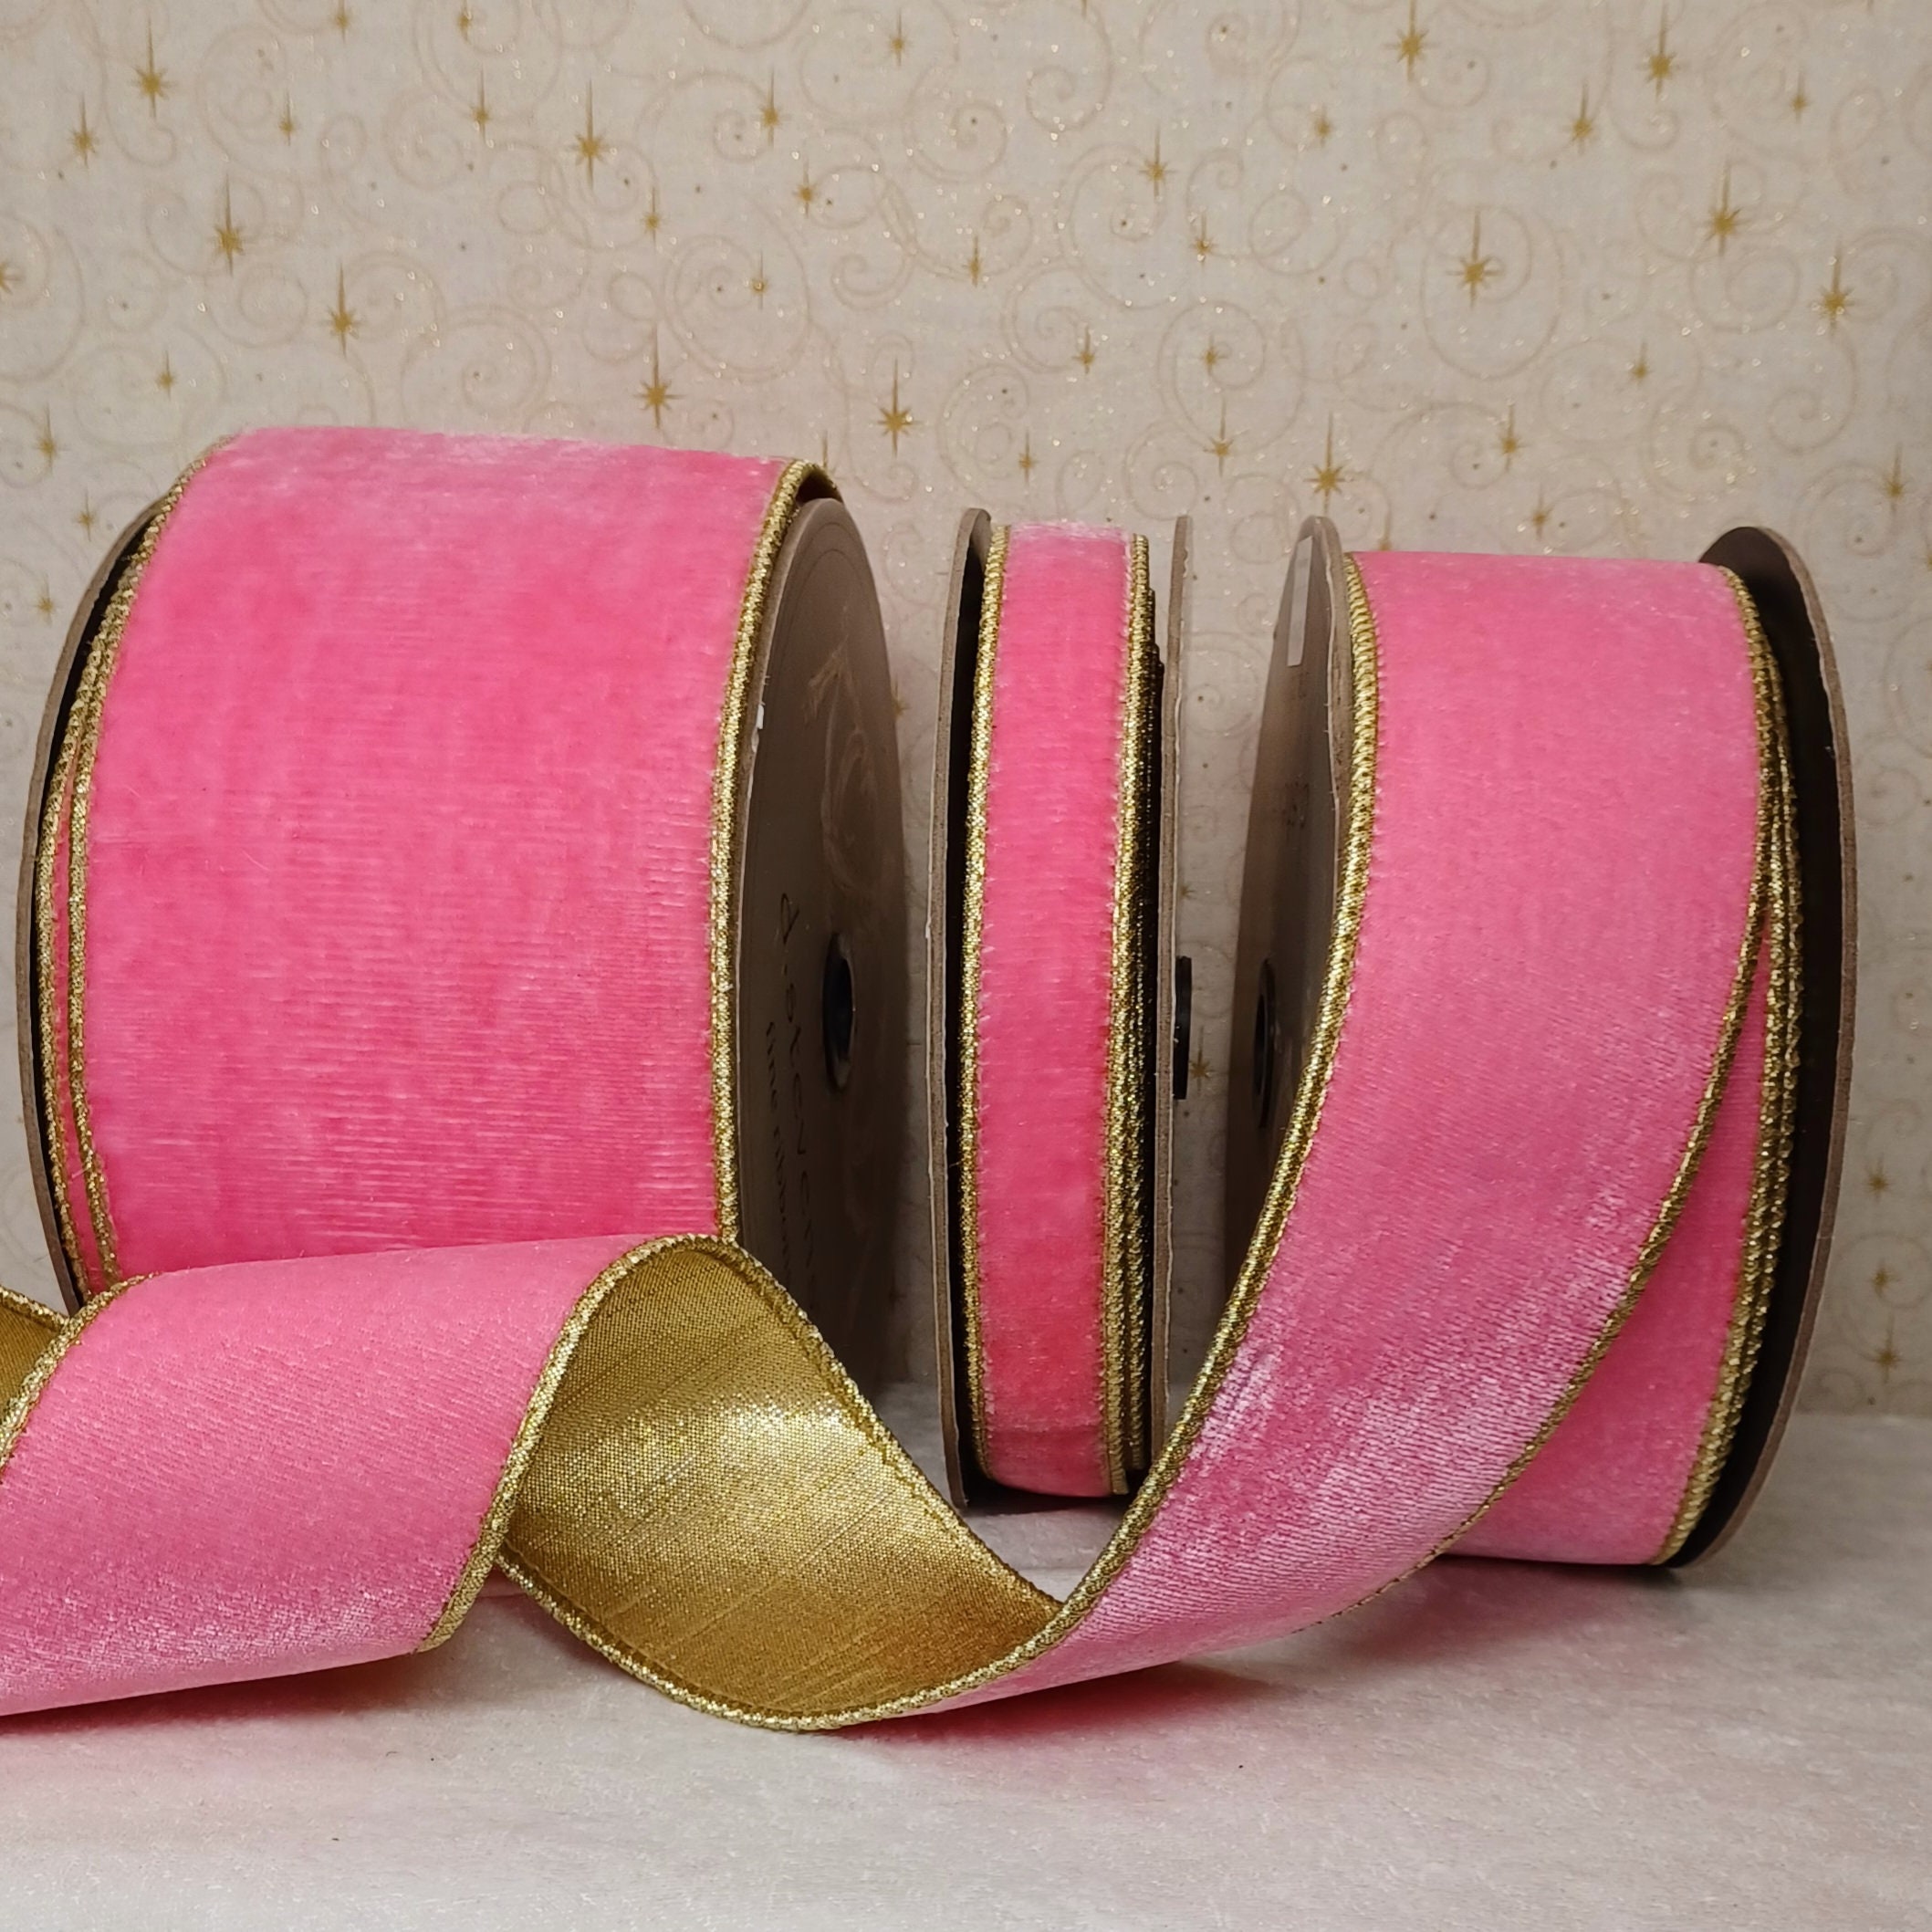 Neon Pink Velvet Ribbon 3/8” wide BY THE YARD